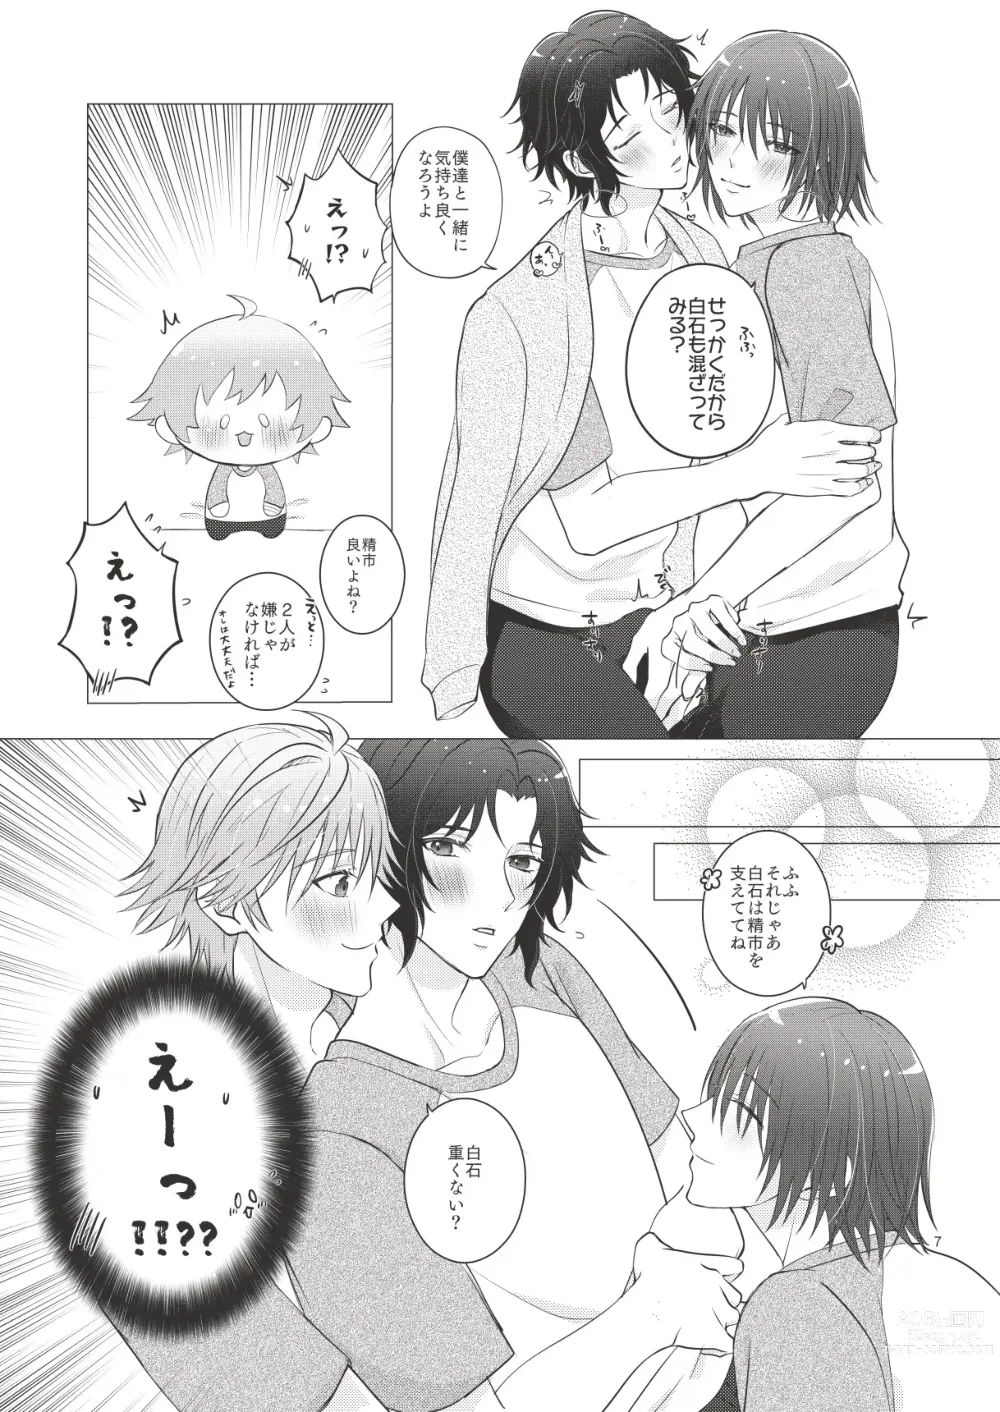 Page 6 of doujinshi Bonds of affection